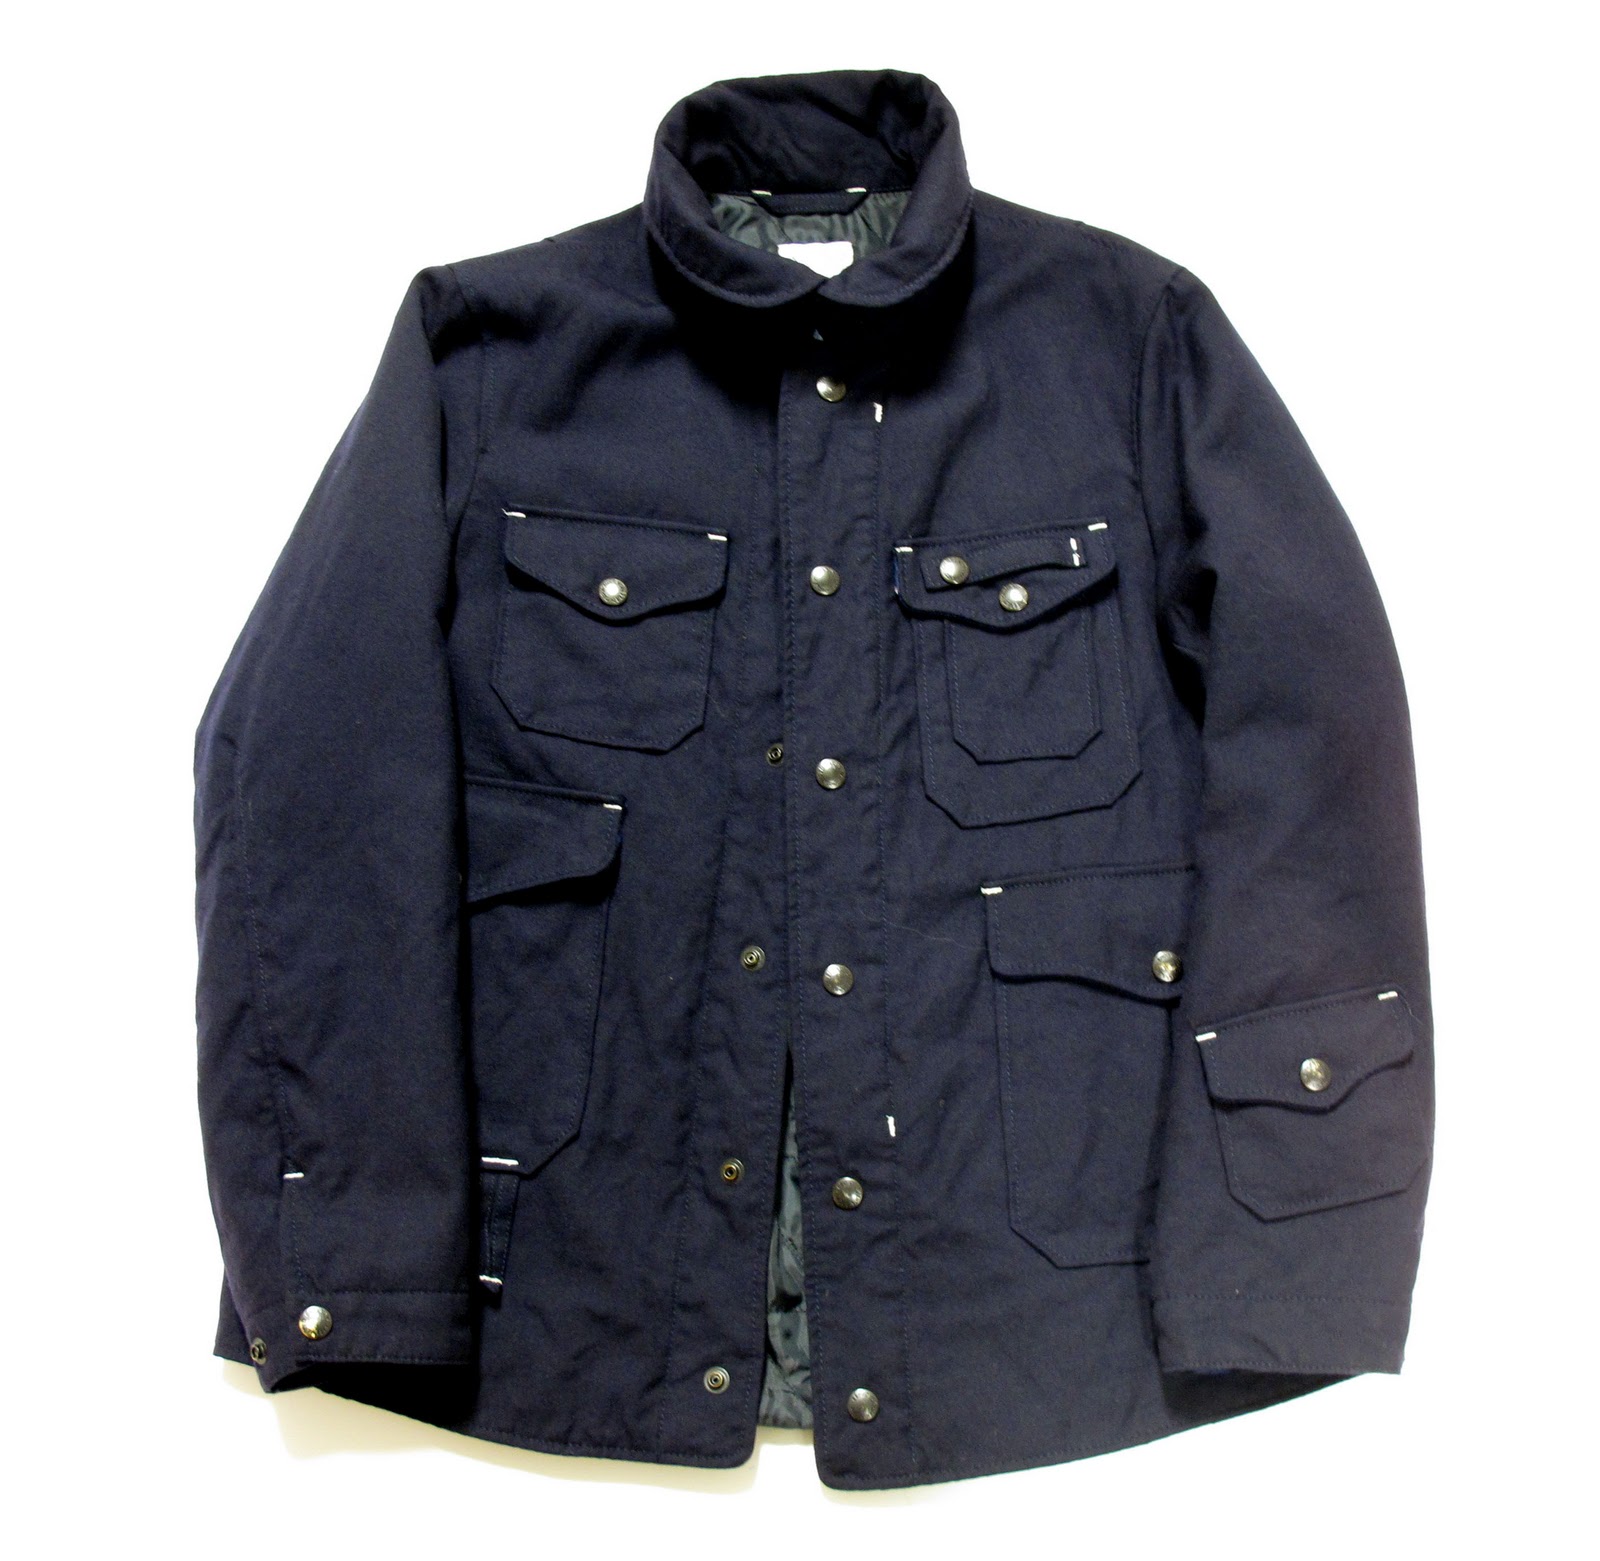 Nepenthes New York: 「IN STOCK」FWK by Engineered Garments FW11 Cruiser ...